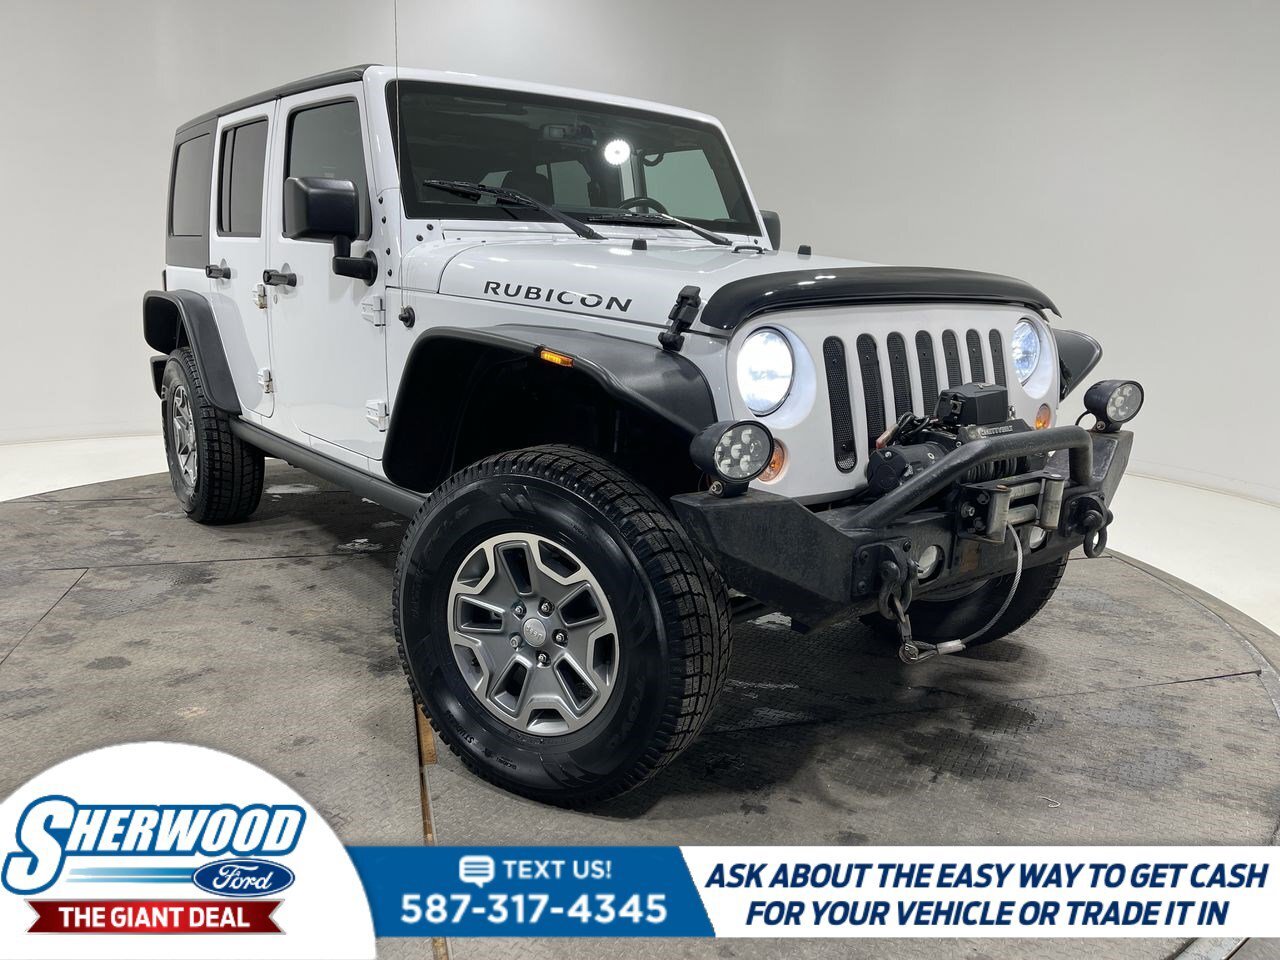 2018 Jeep Wrangler JK Unlimited Rubicon 4X4- $0 Down $184 Weekly